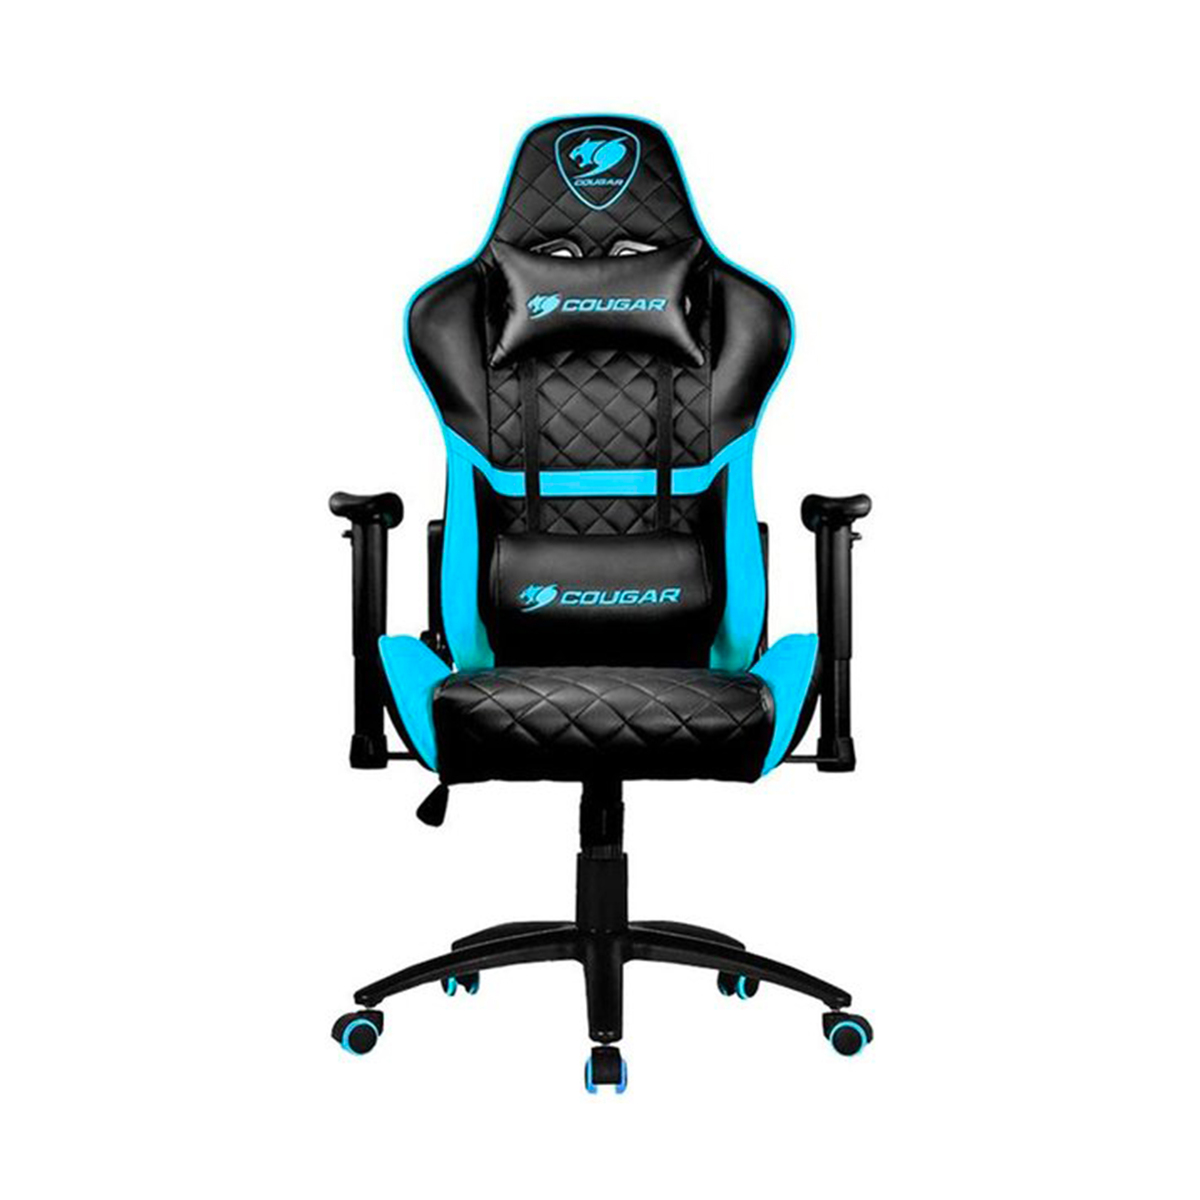 Cougar Armor One Gaming Chair CG-ARMORONE Blue Online at Best Price ...